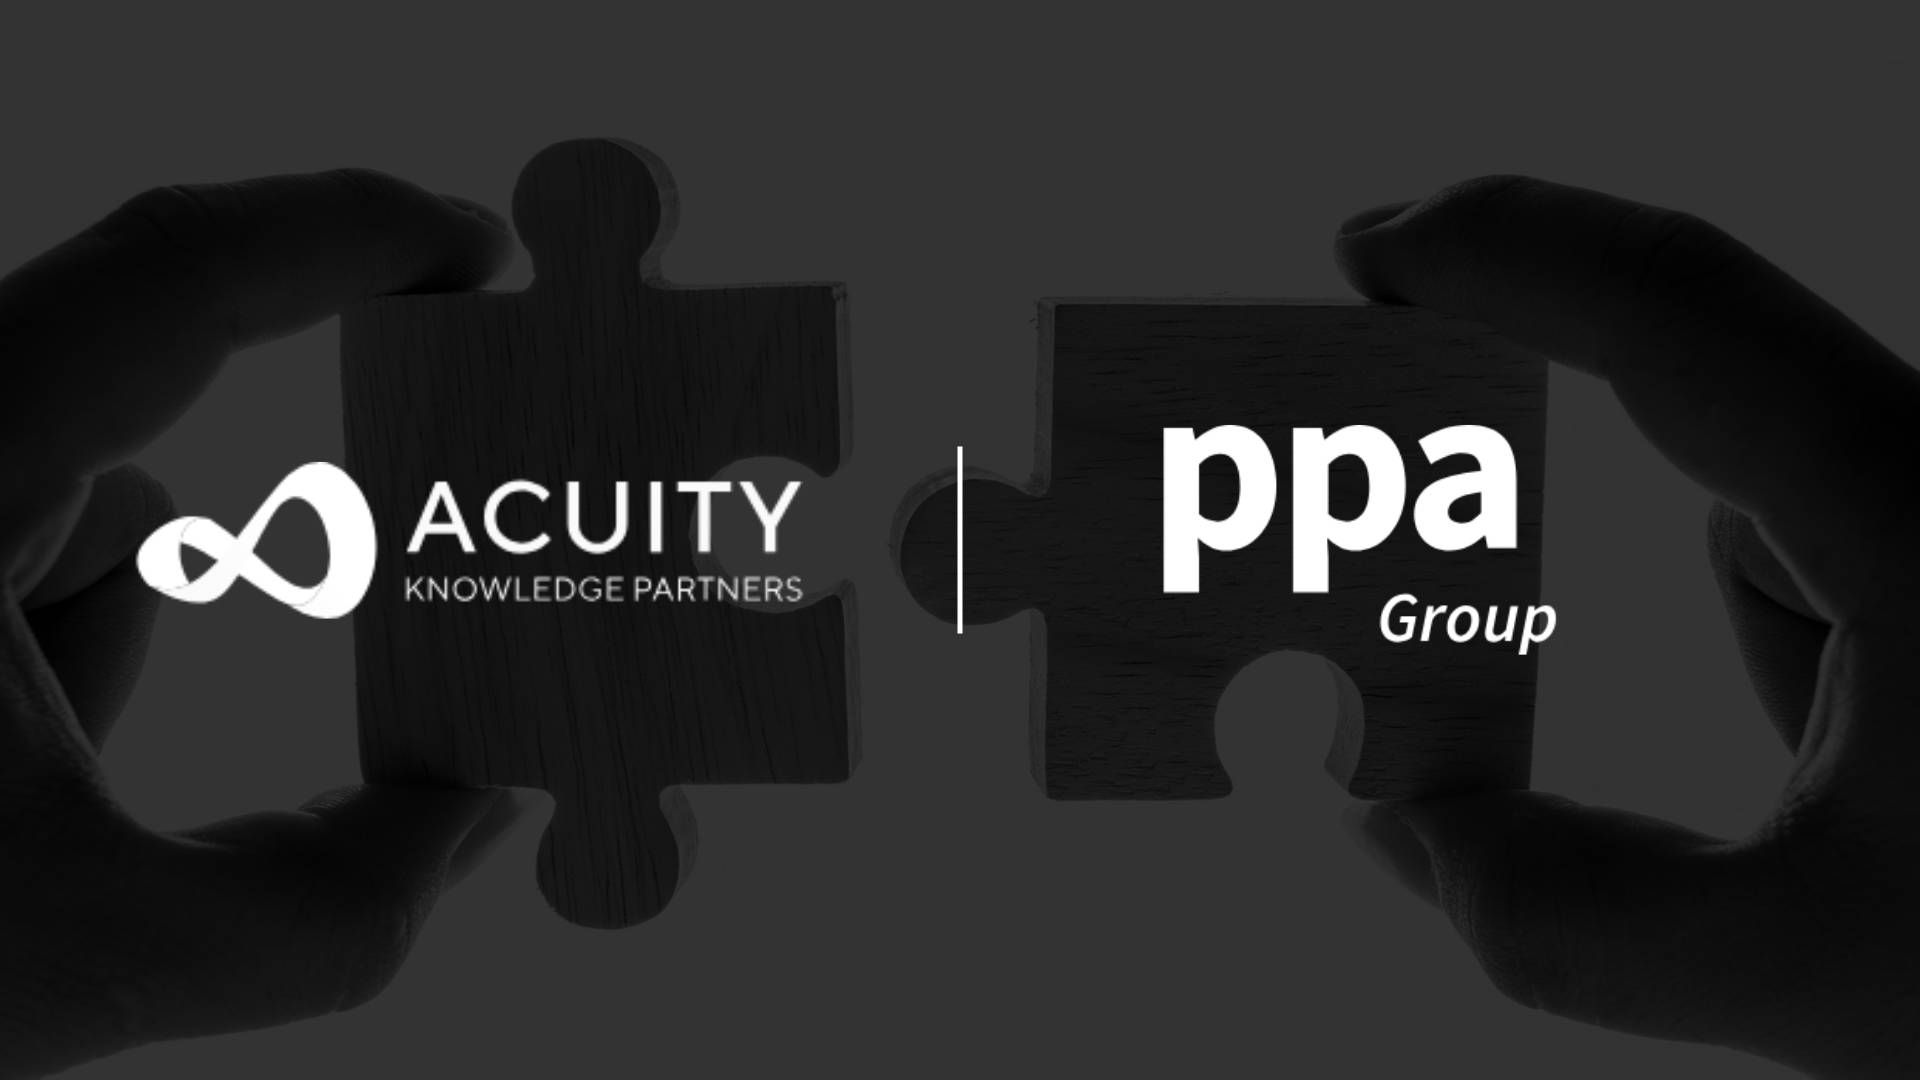 Acuity Knowledge Partners Acquires PPA Group to Enhance Data Services